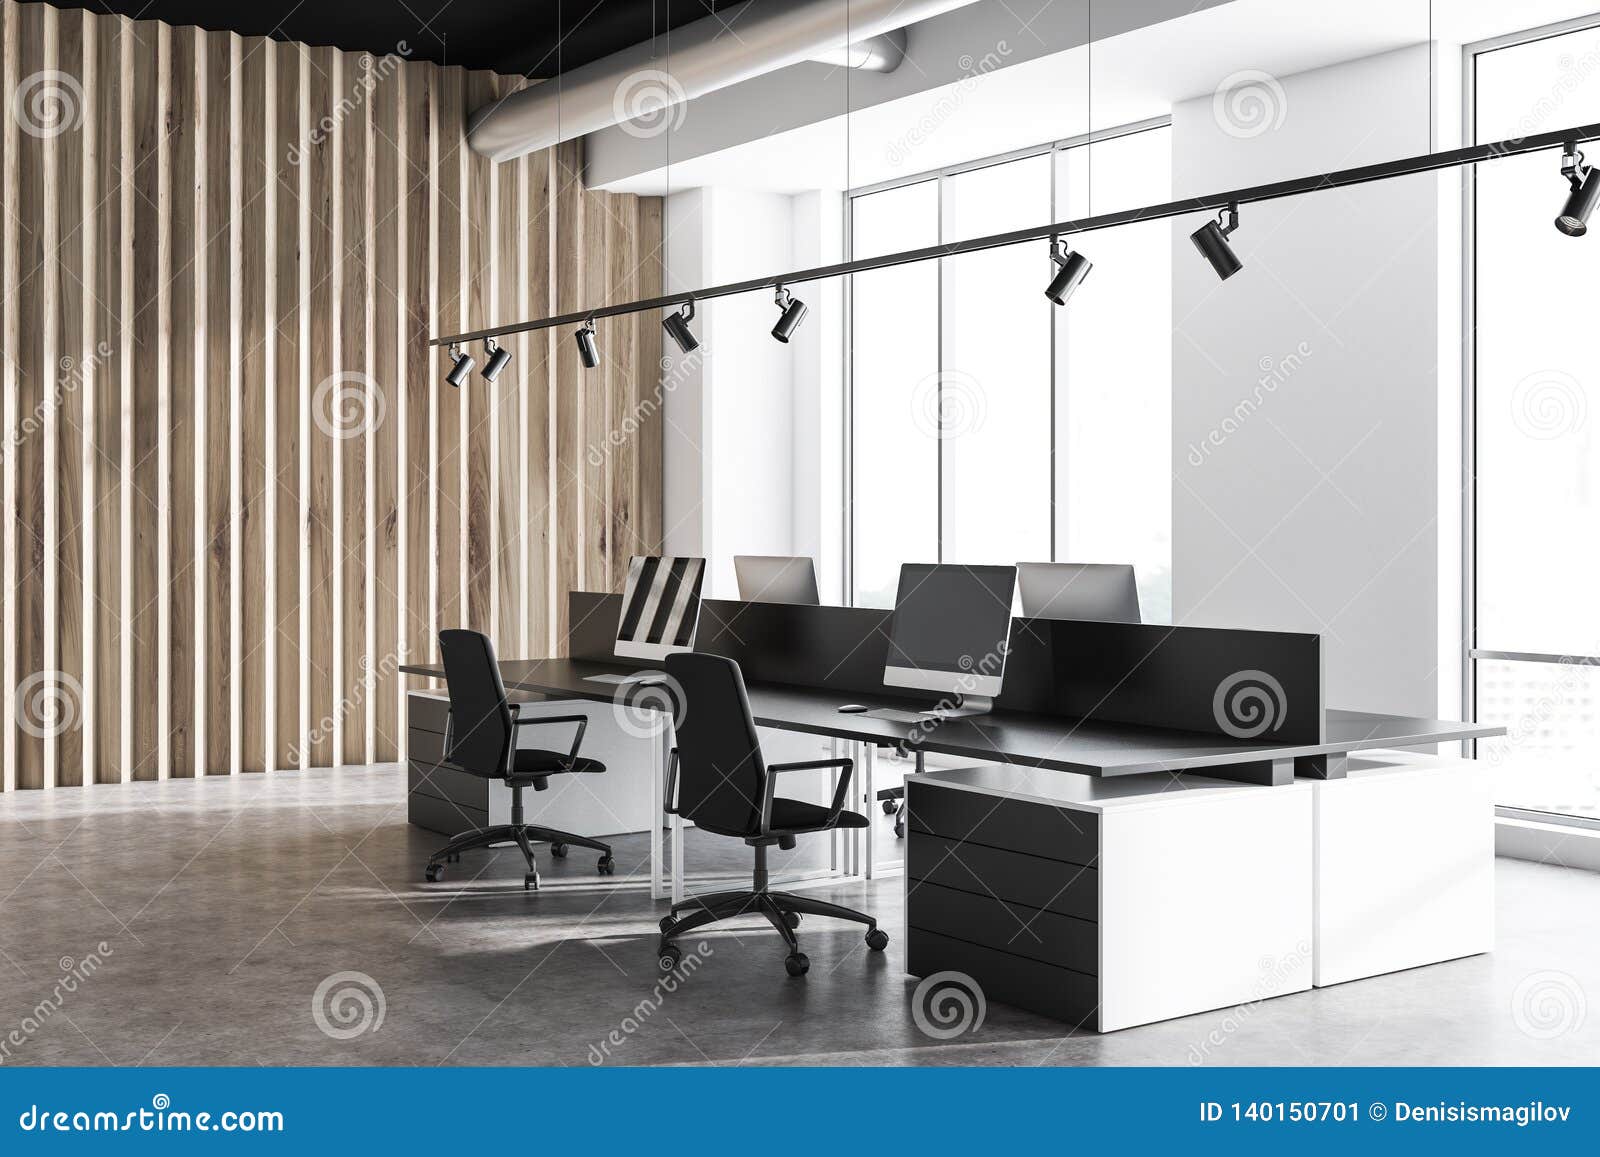 Concrete And Wooden Industrial Style Office Corner Stock